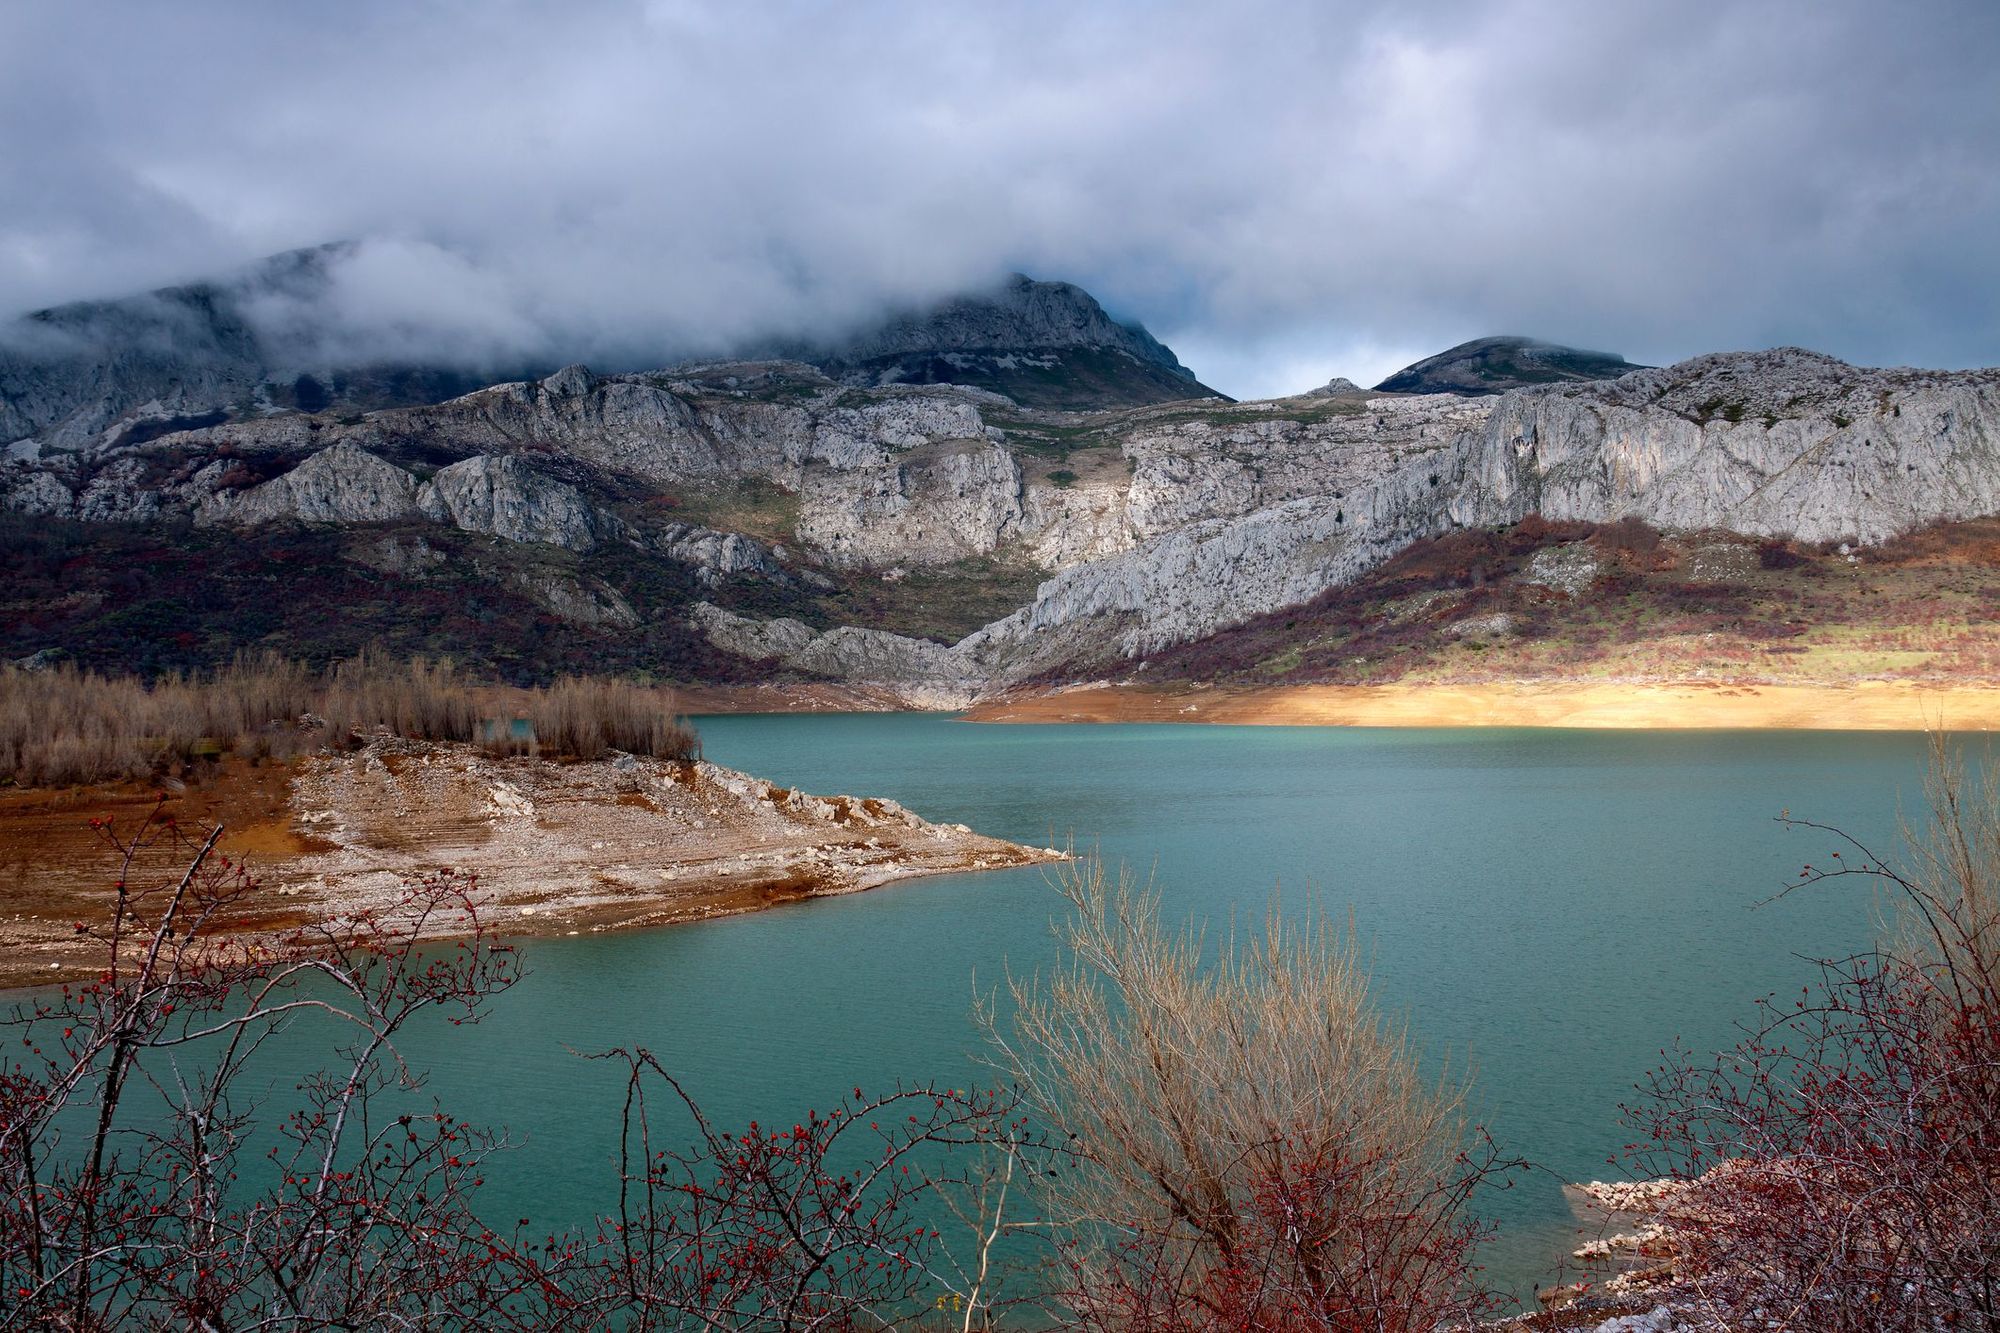 Aututmnal colours and cloudy skies in Picos de Europa.